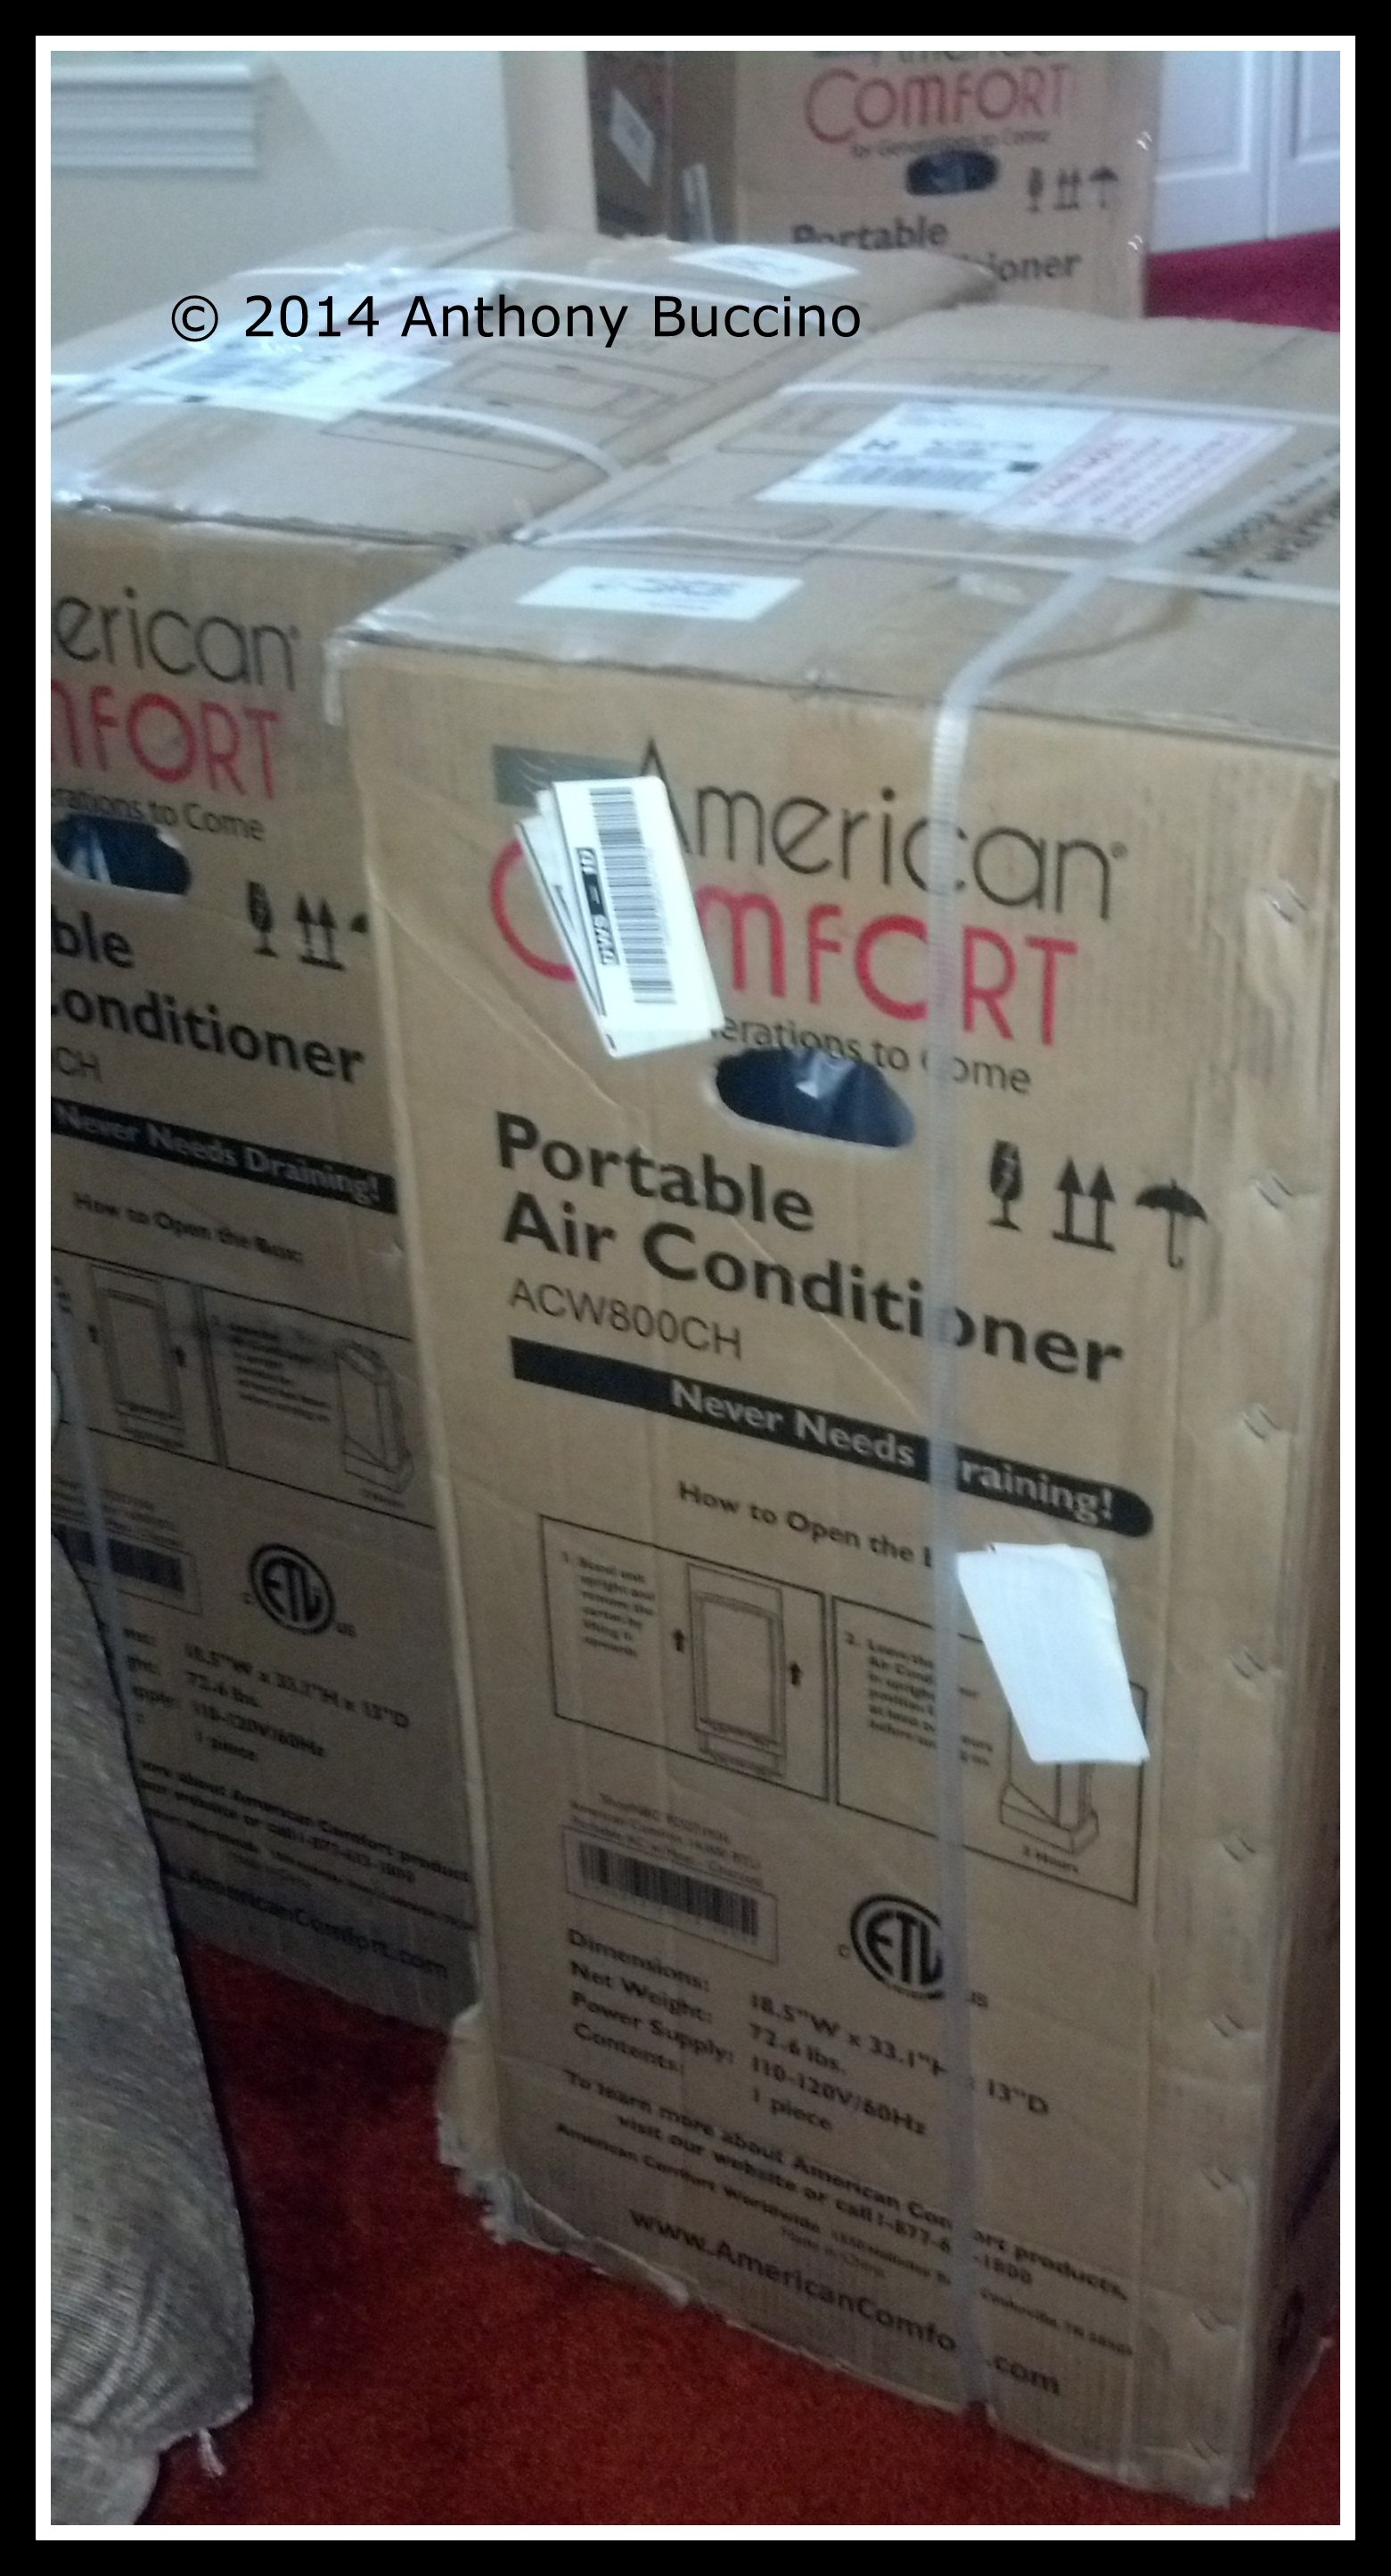 American Comfort portable air conditioning from Home Depot via UPS